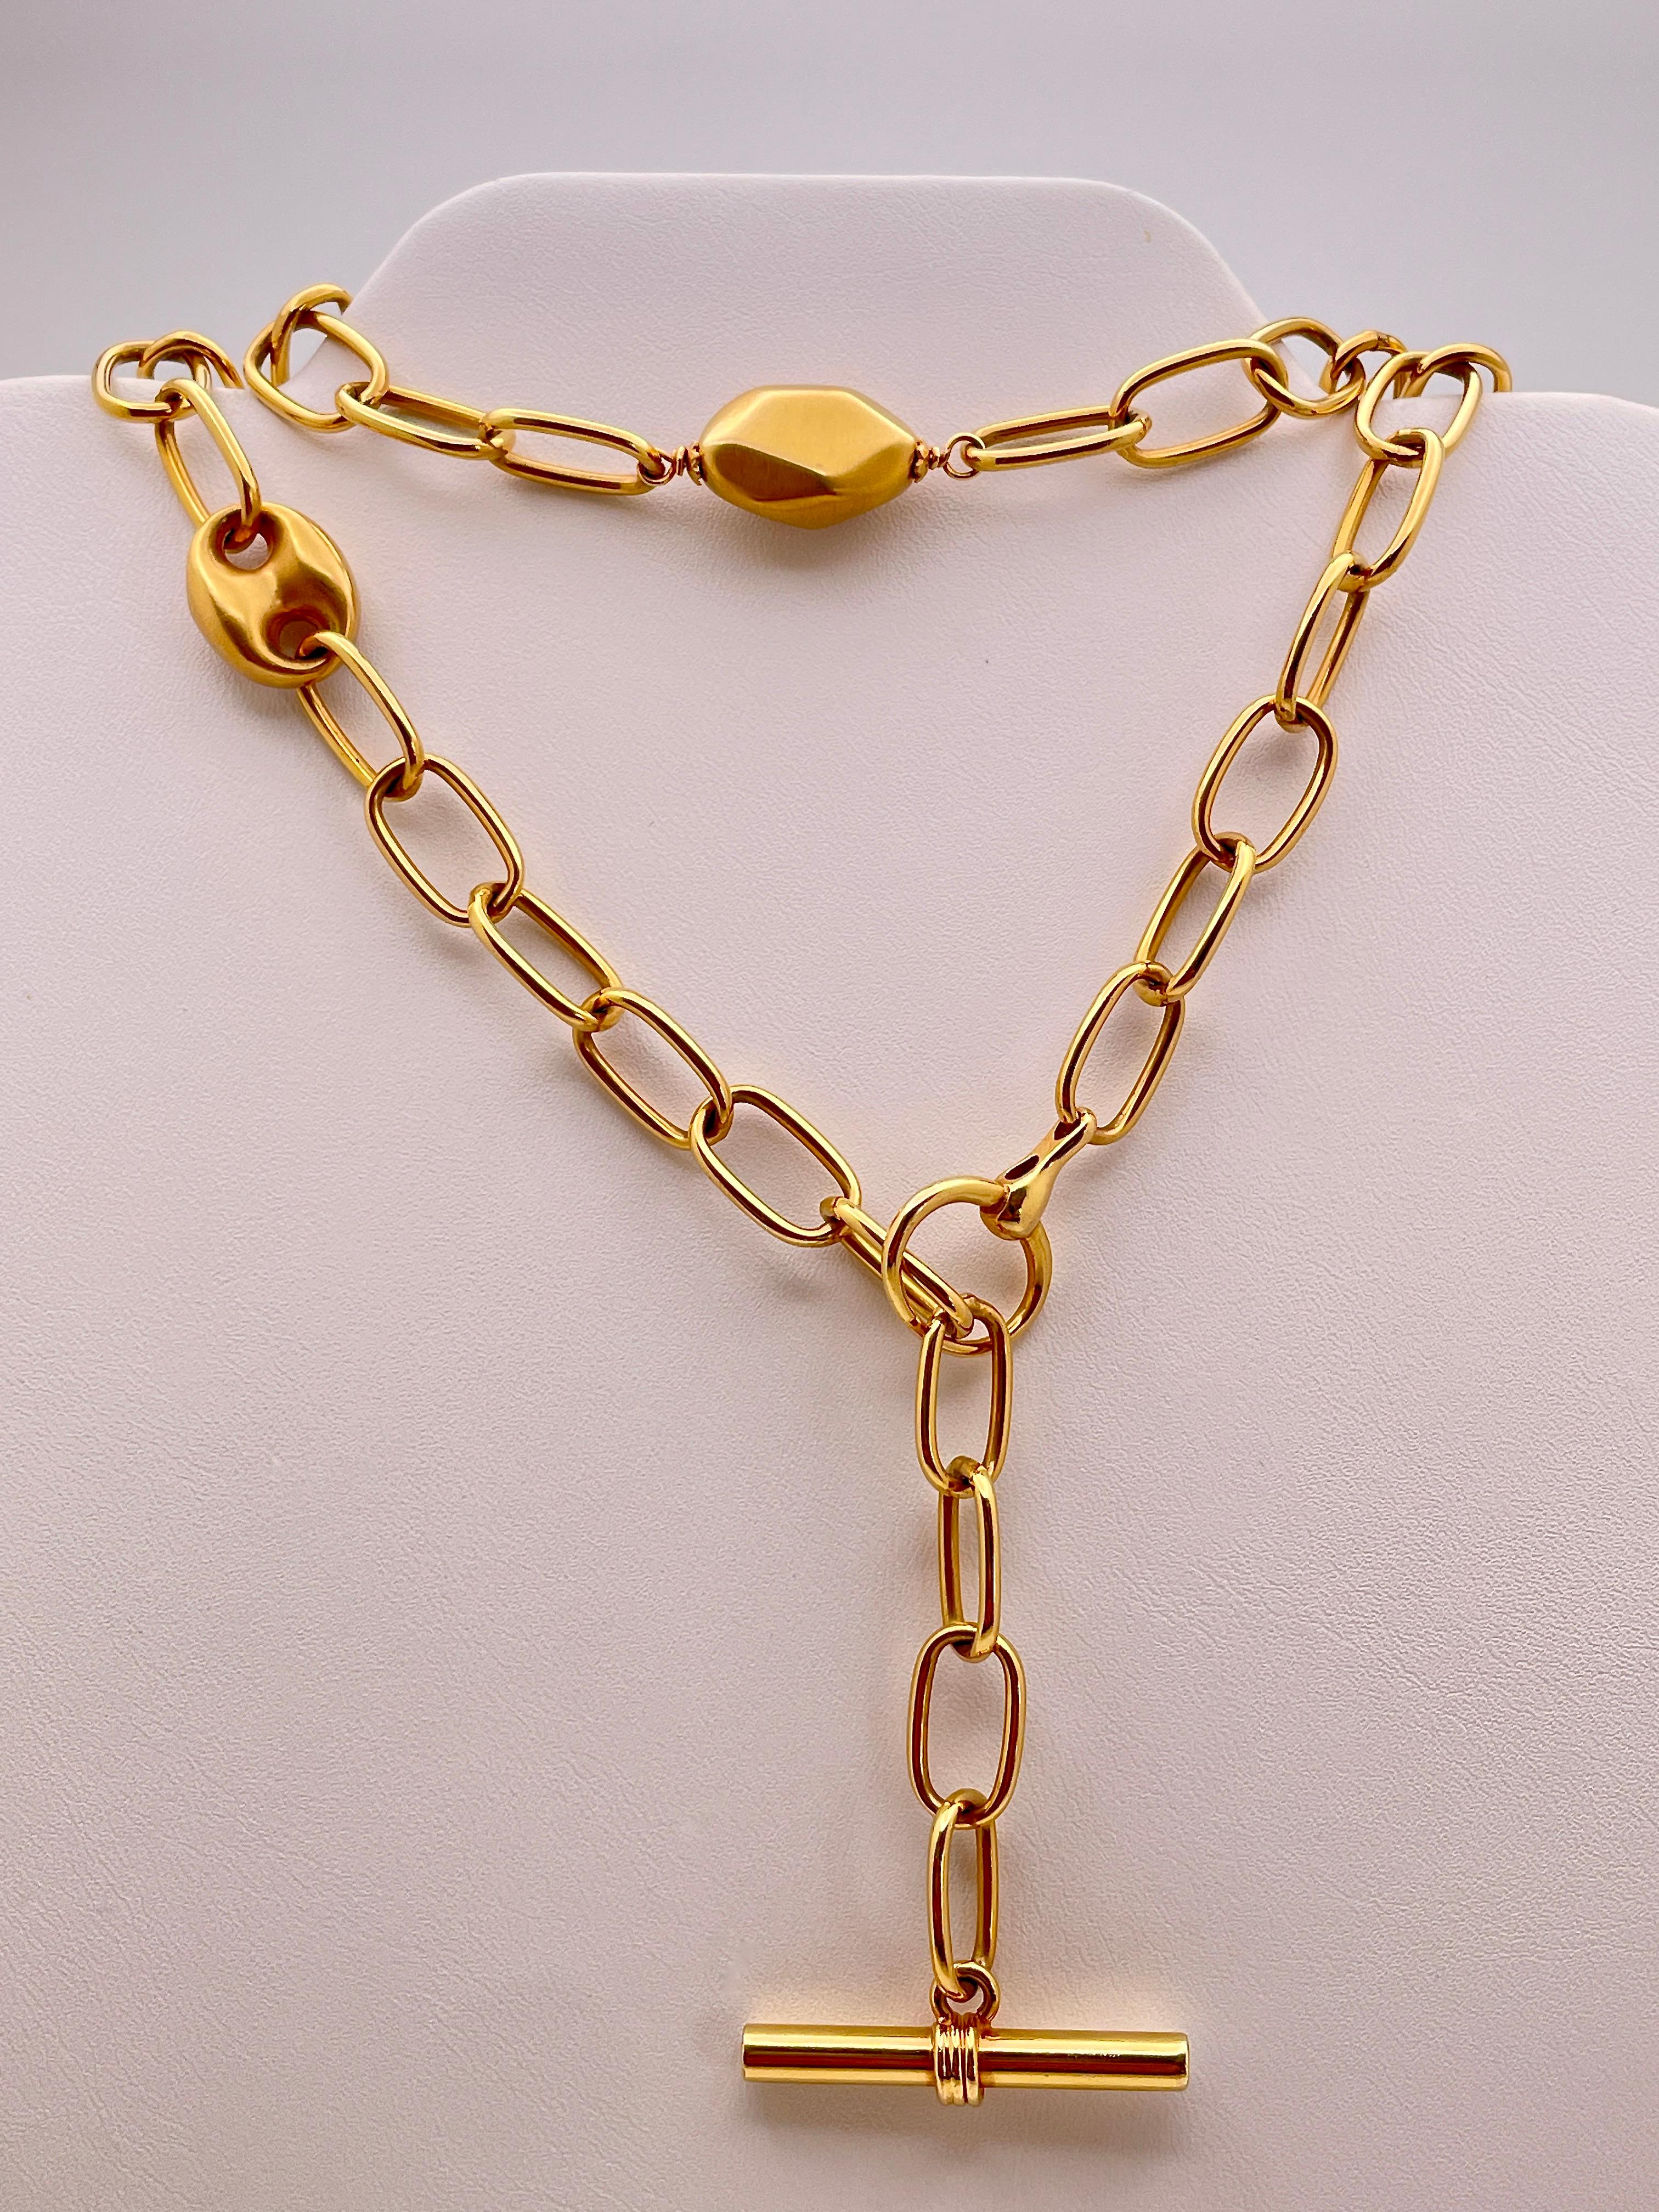 18K Rose Gold Gucci Design Toggle Clasp Link Necklace For Sale 1